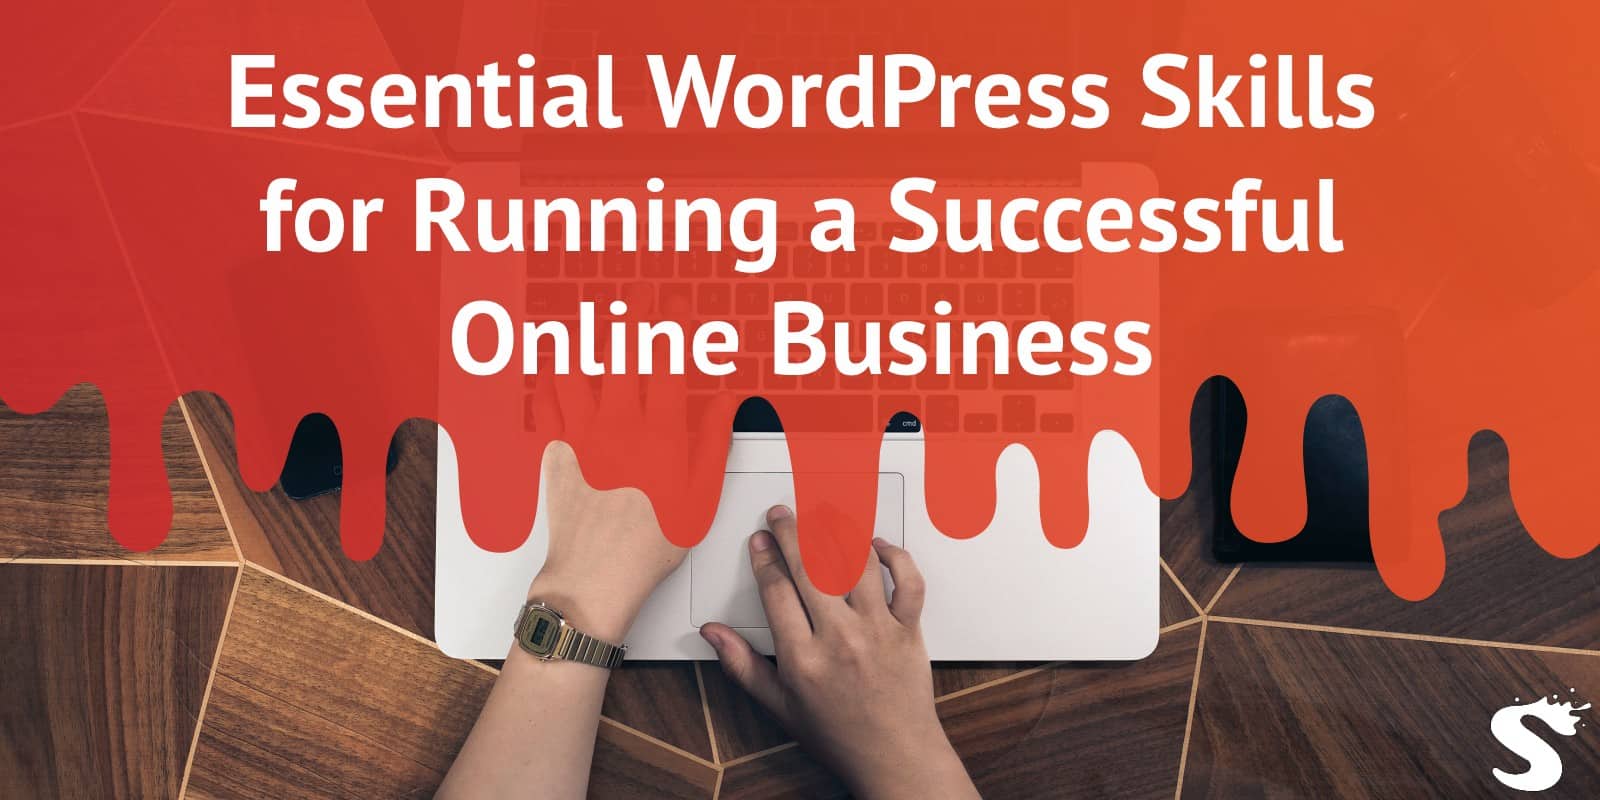 Essential WordPress Skills for Running a Successful Online Business